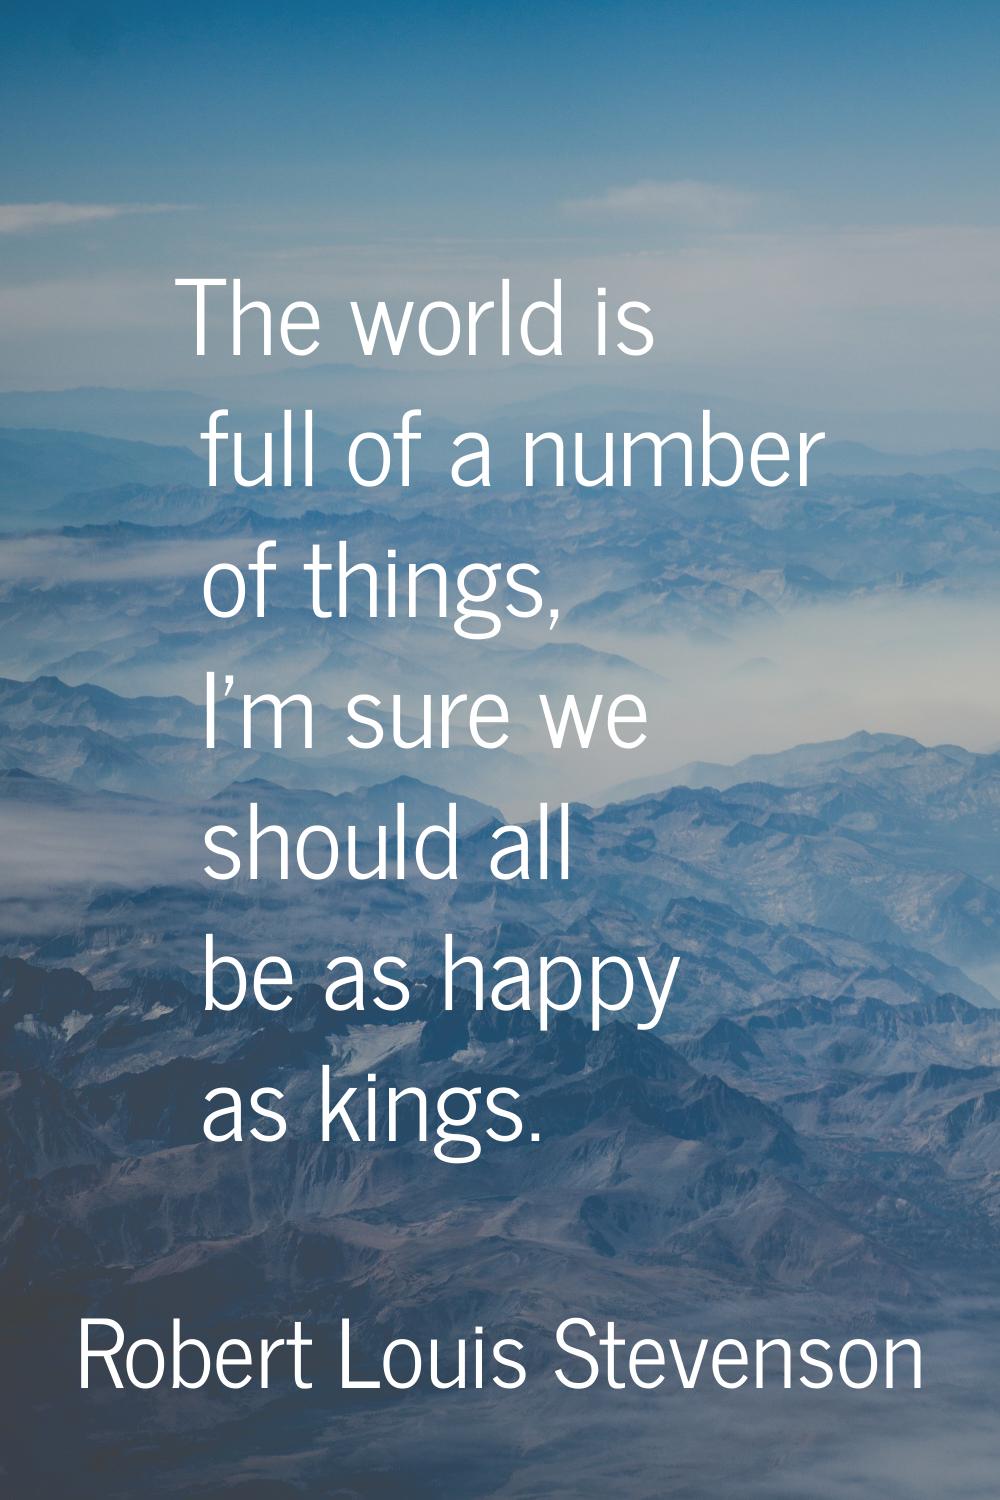 The world is full of a number of things, I'm sure we should all be as happy as kings.